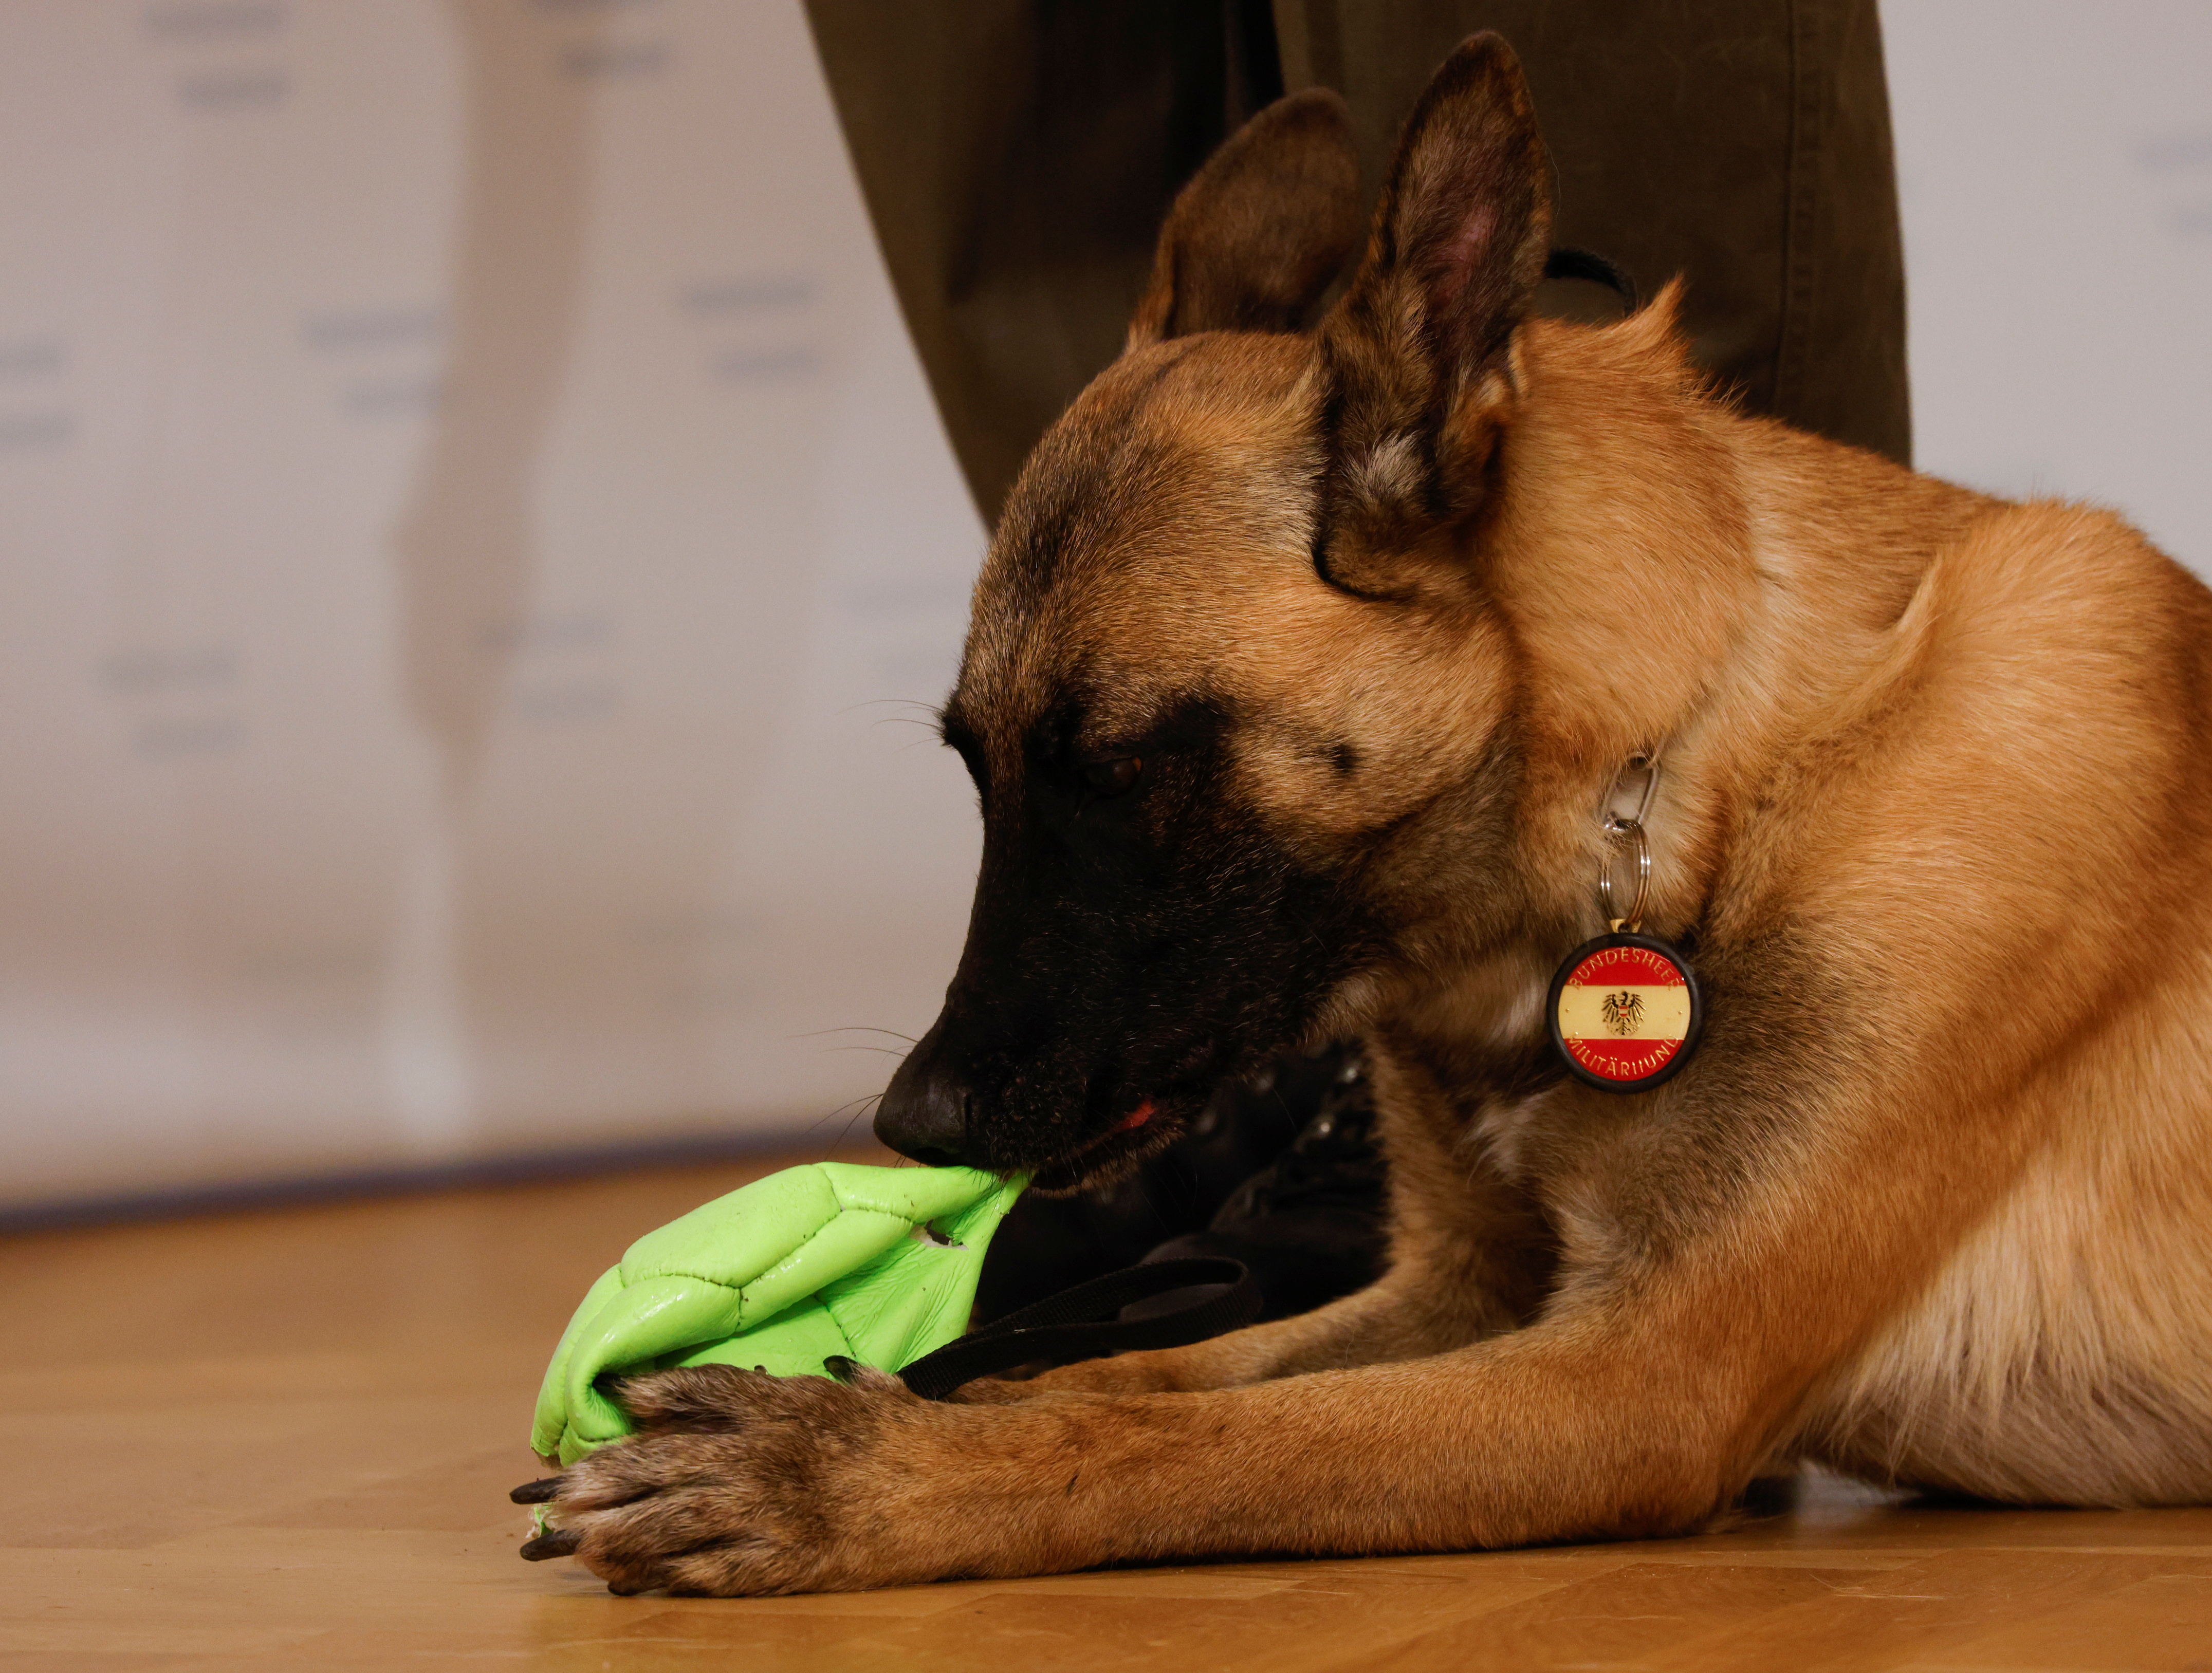 Austrian army reports on training dogs to detect COVID-19 in Vienna